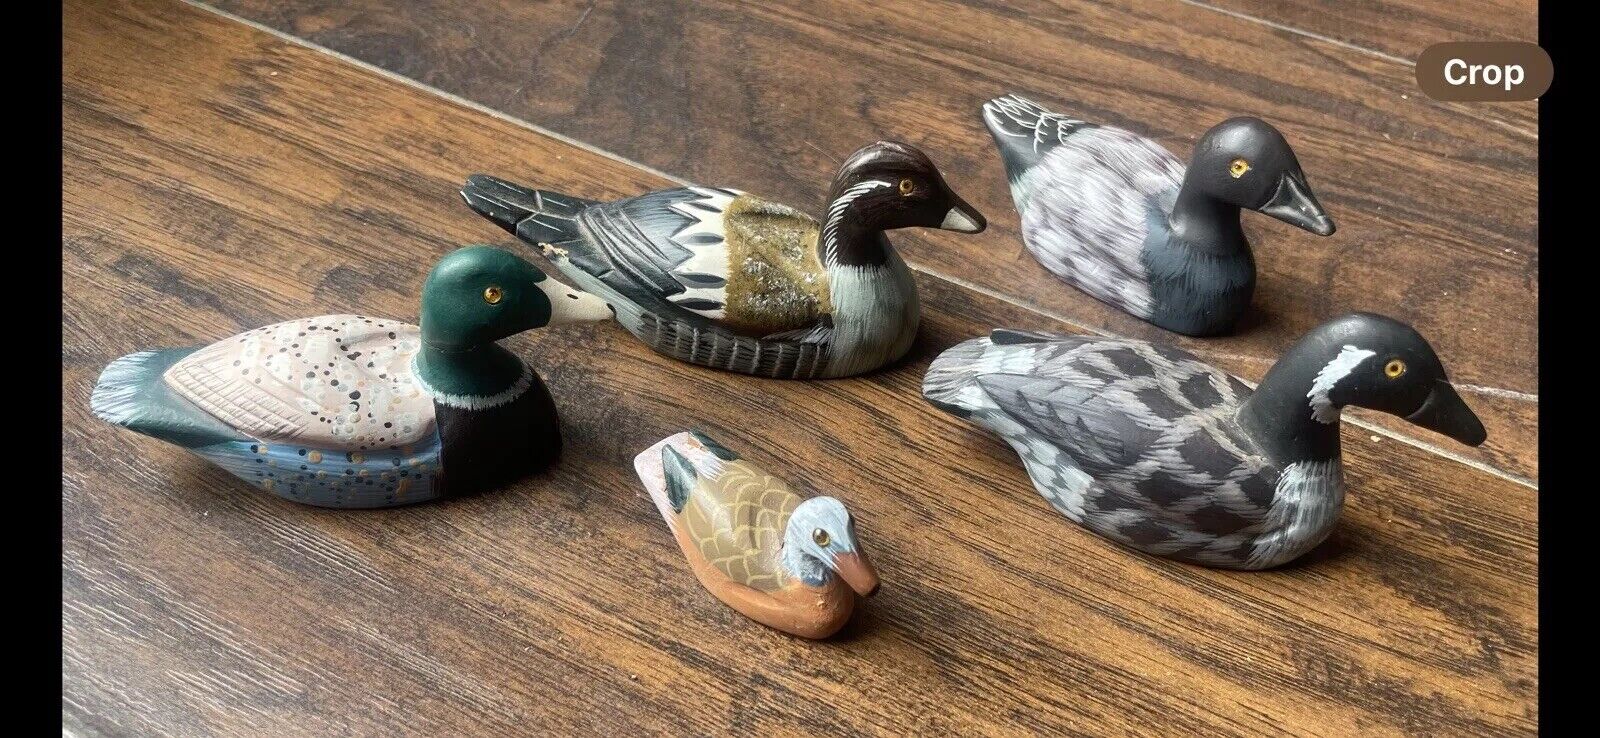 5 Pc Vintage Hand Painted Carved Wood Duck Mini Decoy Figures For Decor